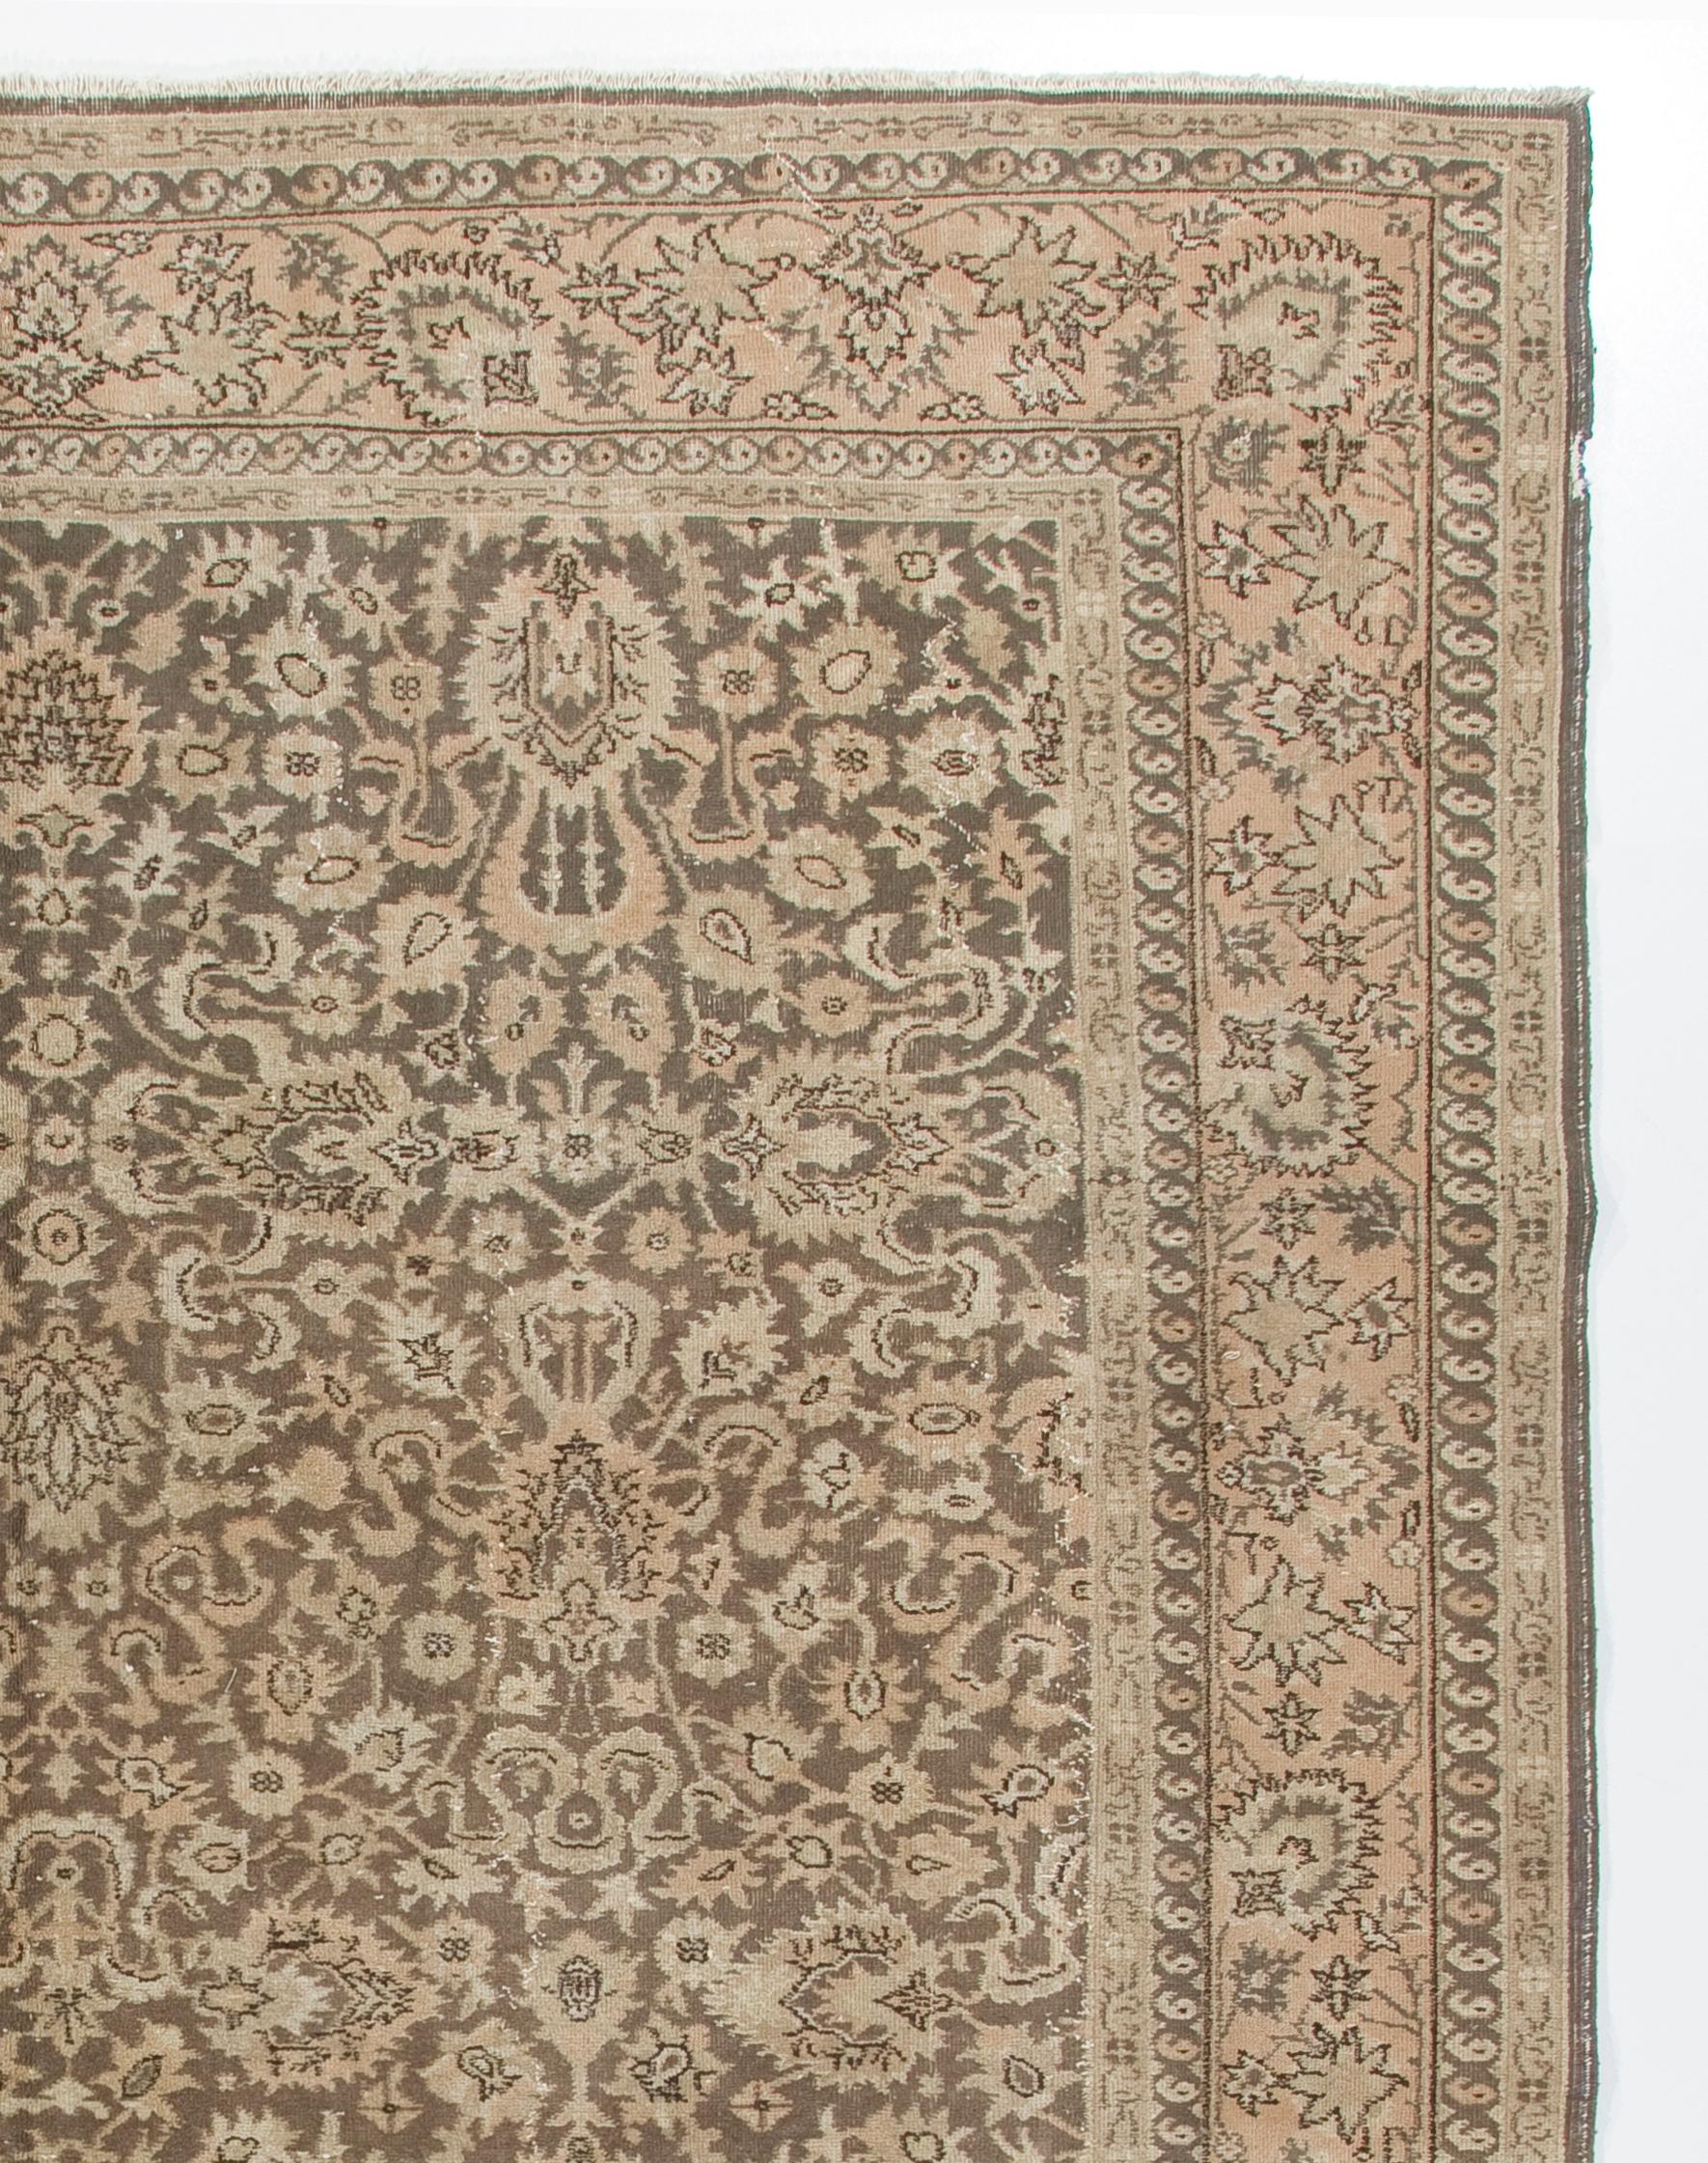 Oushak 9.2x12 Ft One-of-a-Kind Turkish Sivas Rug in Soft Taupe Brown and Beige Colors For Sale